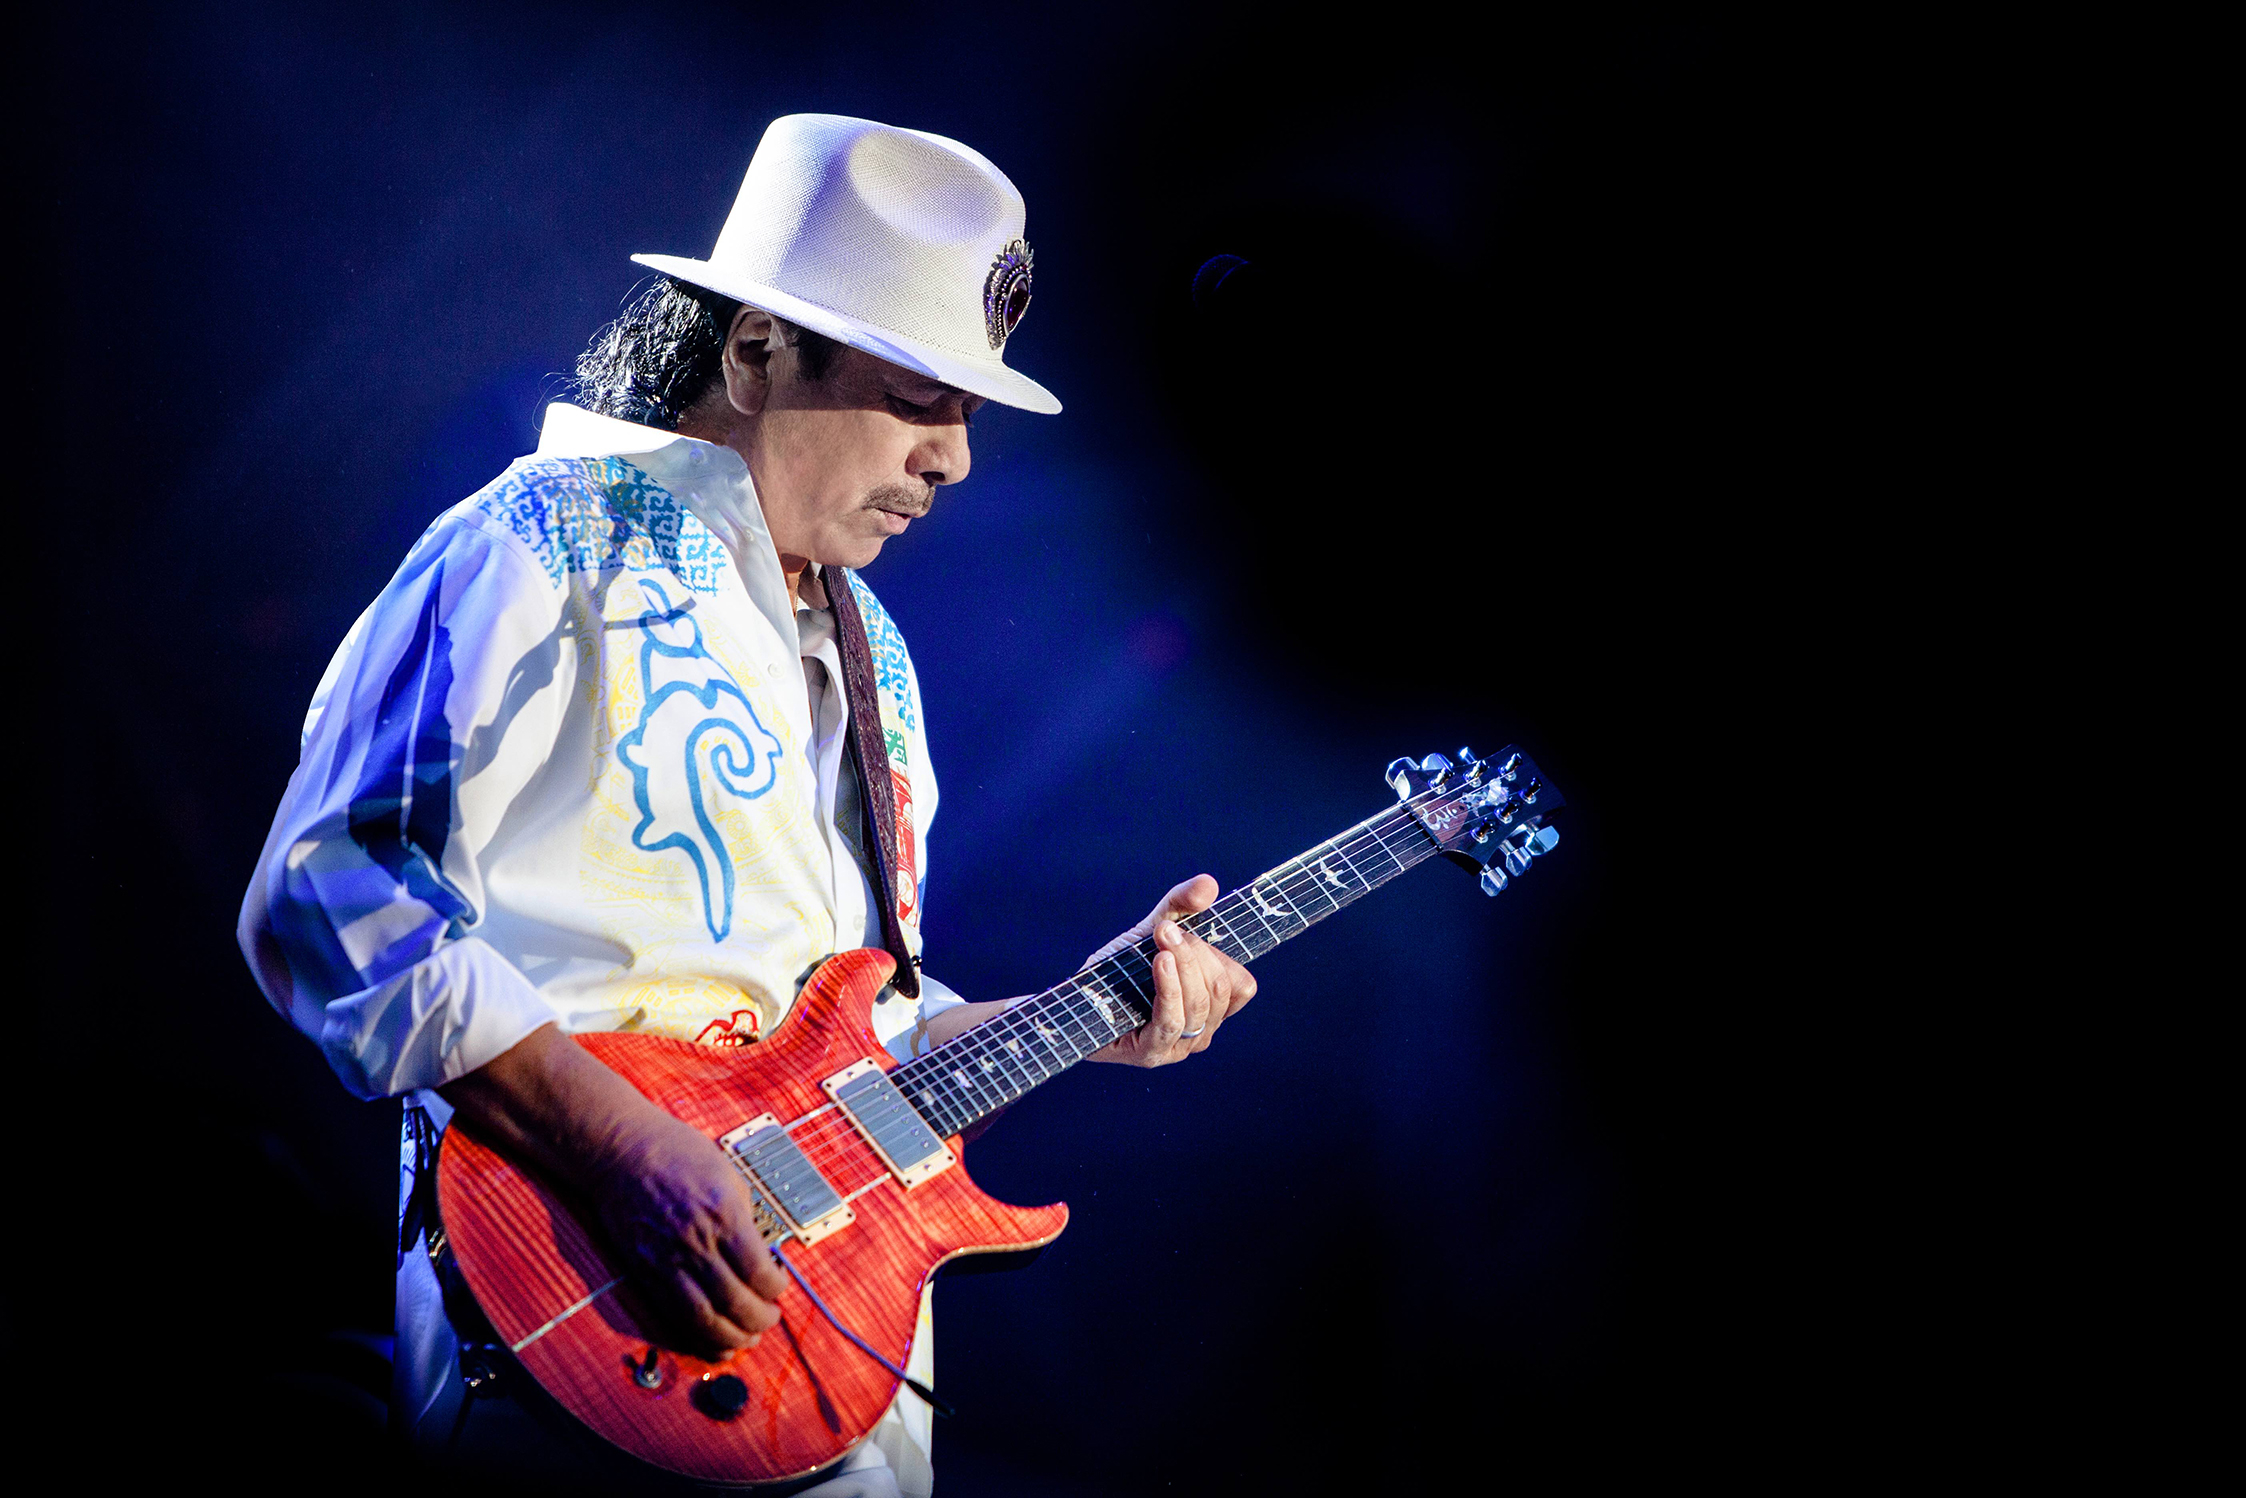 Carlos Santana on spirituality in music, 53 years after Woodstock